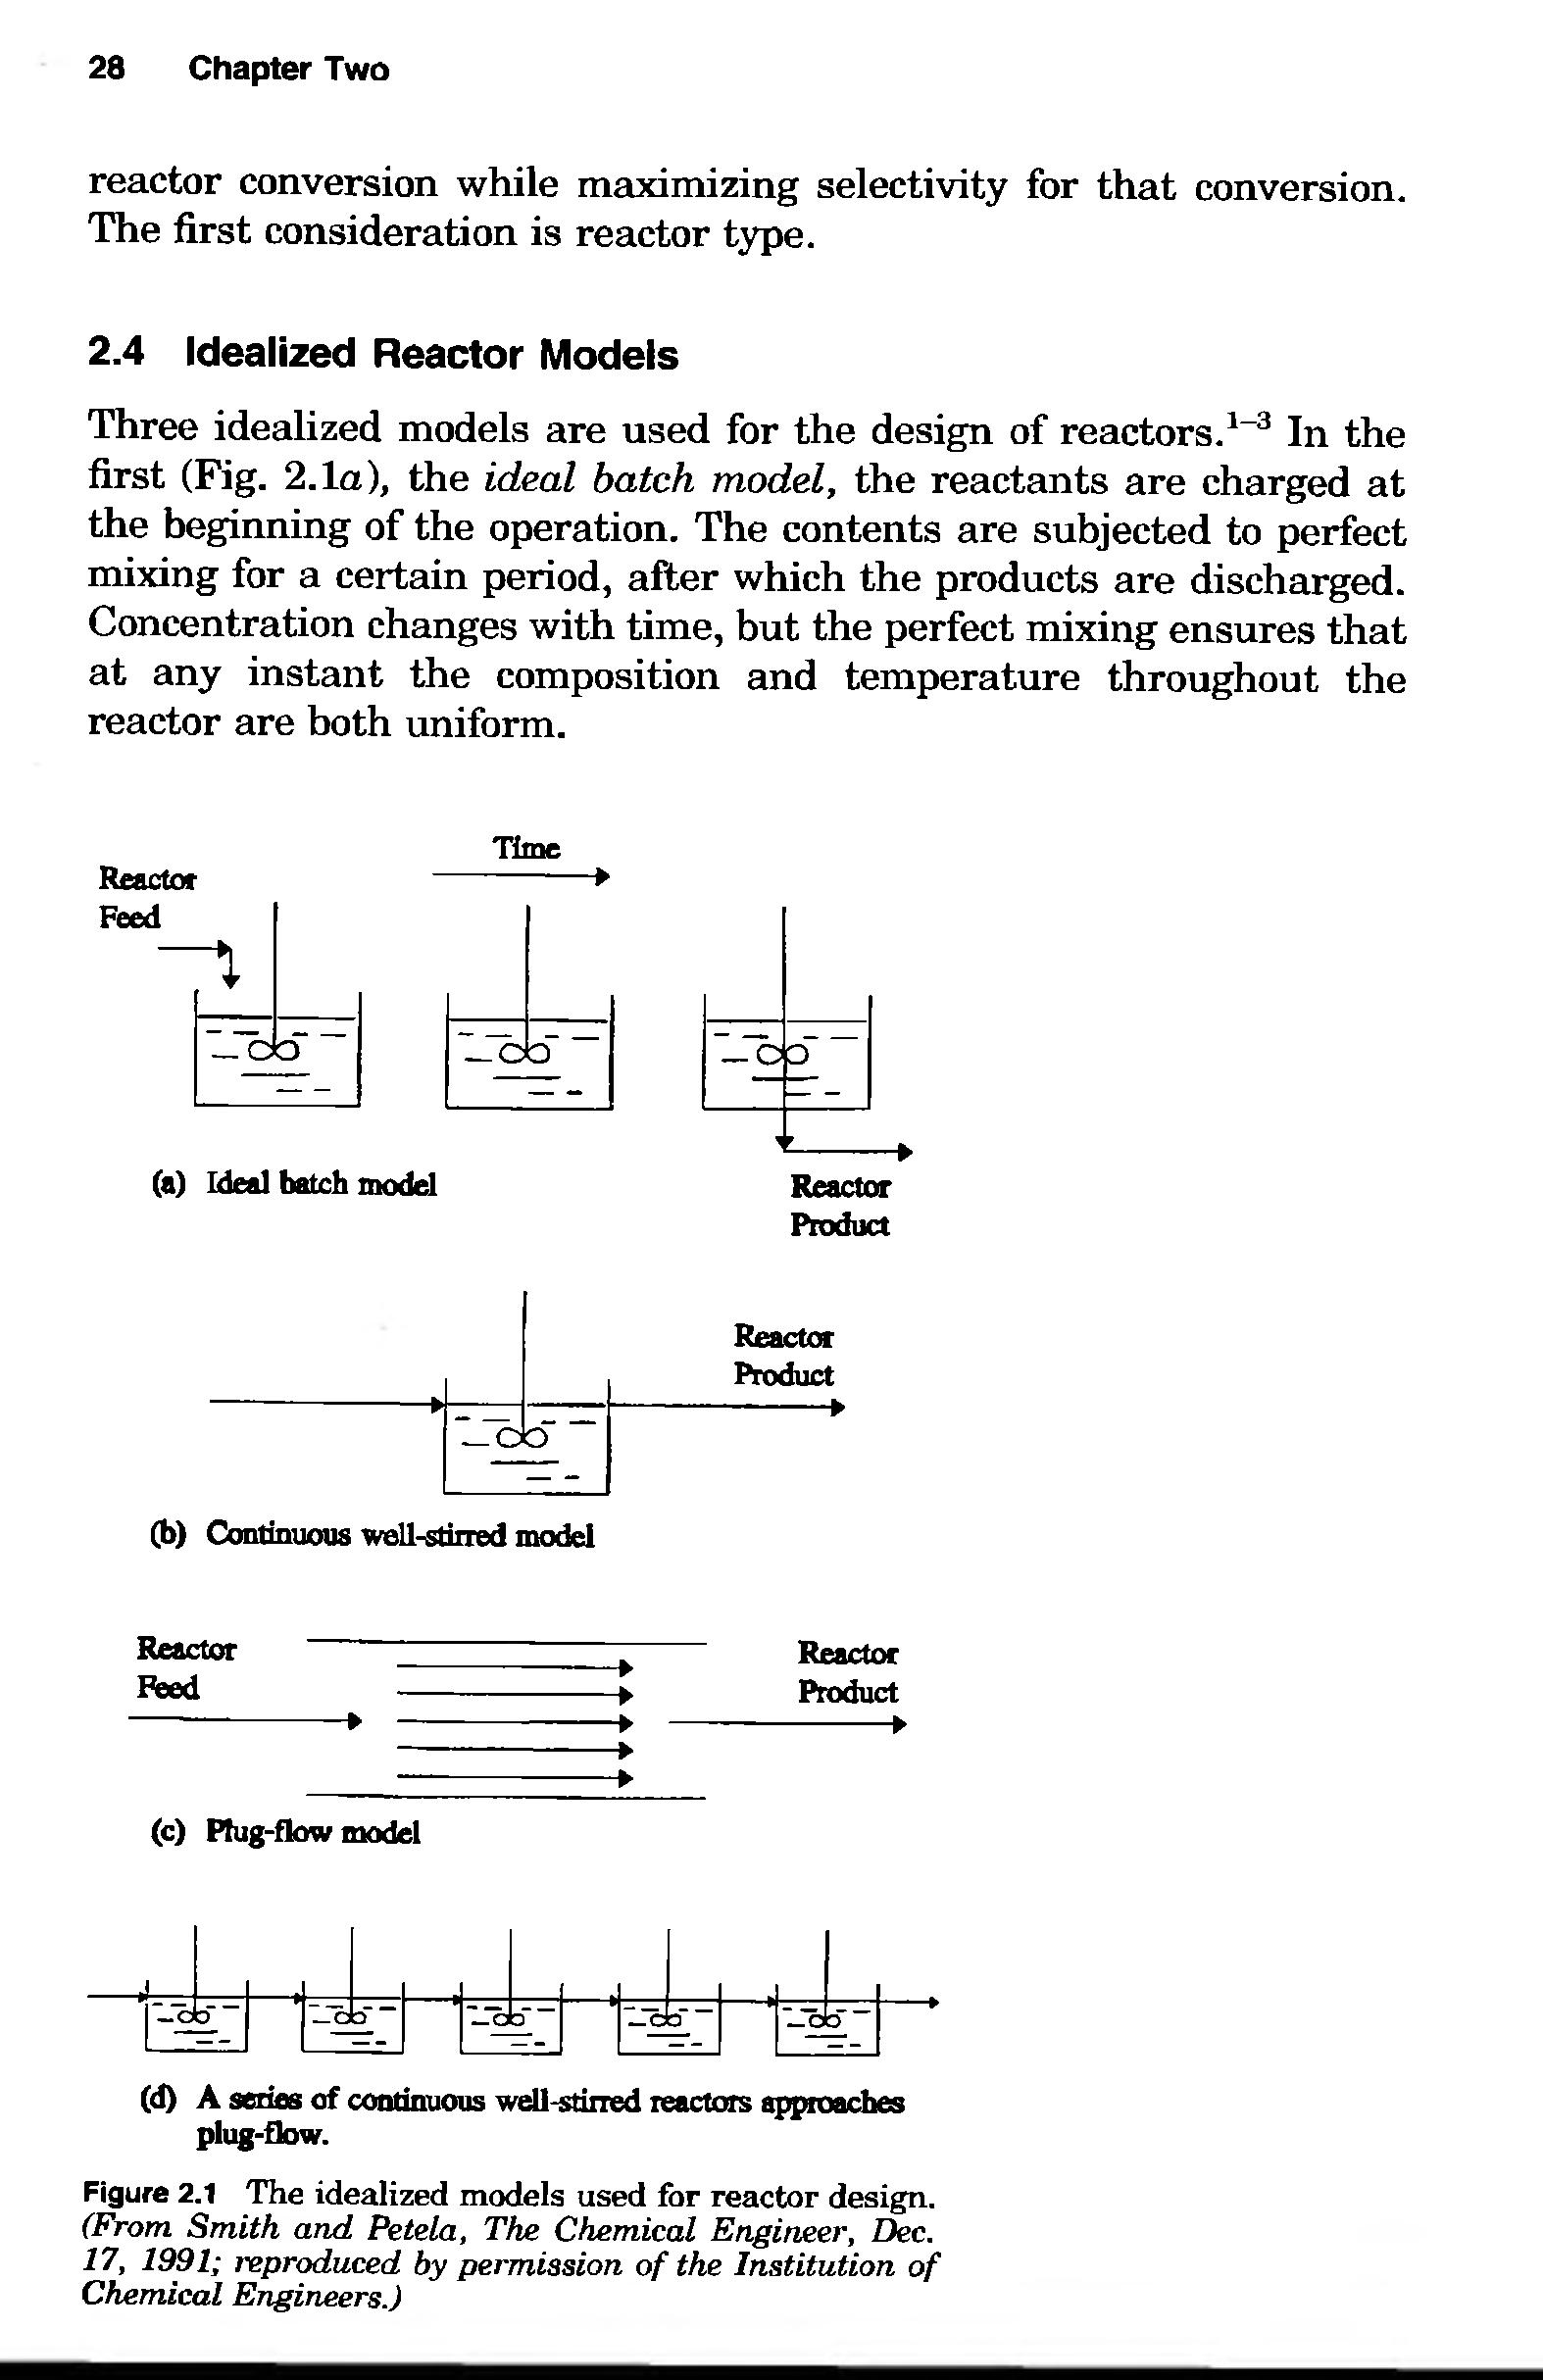 Figure 2.1 The idealized models used for reactor design. (From Smith and Petela, Thz Chemical Engineer, Dec. 17, 1991 reproduced by permission of the Institution of Chemical Engineers.)...